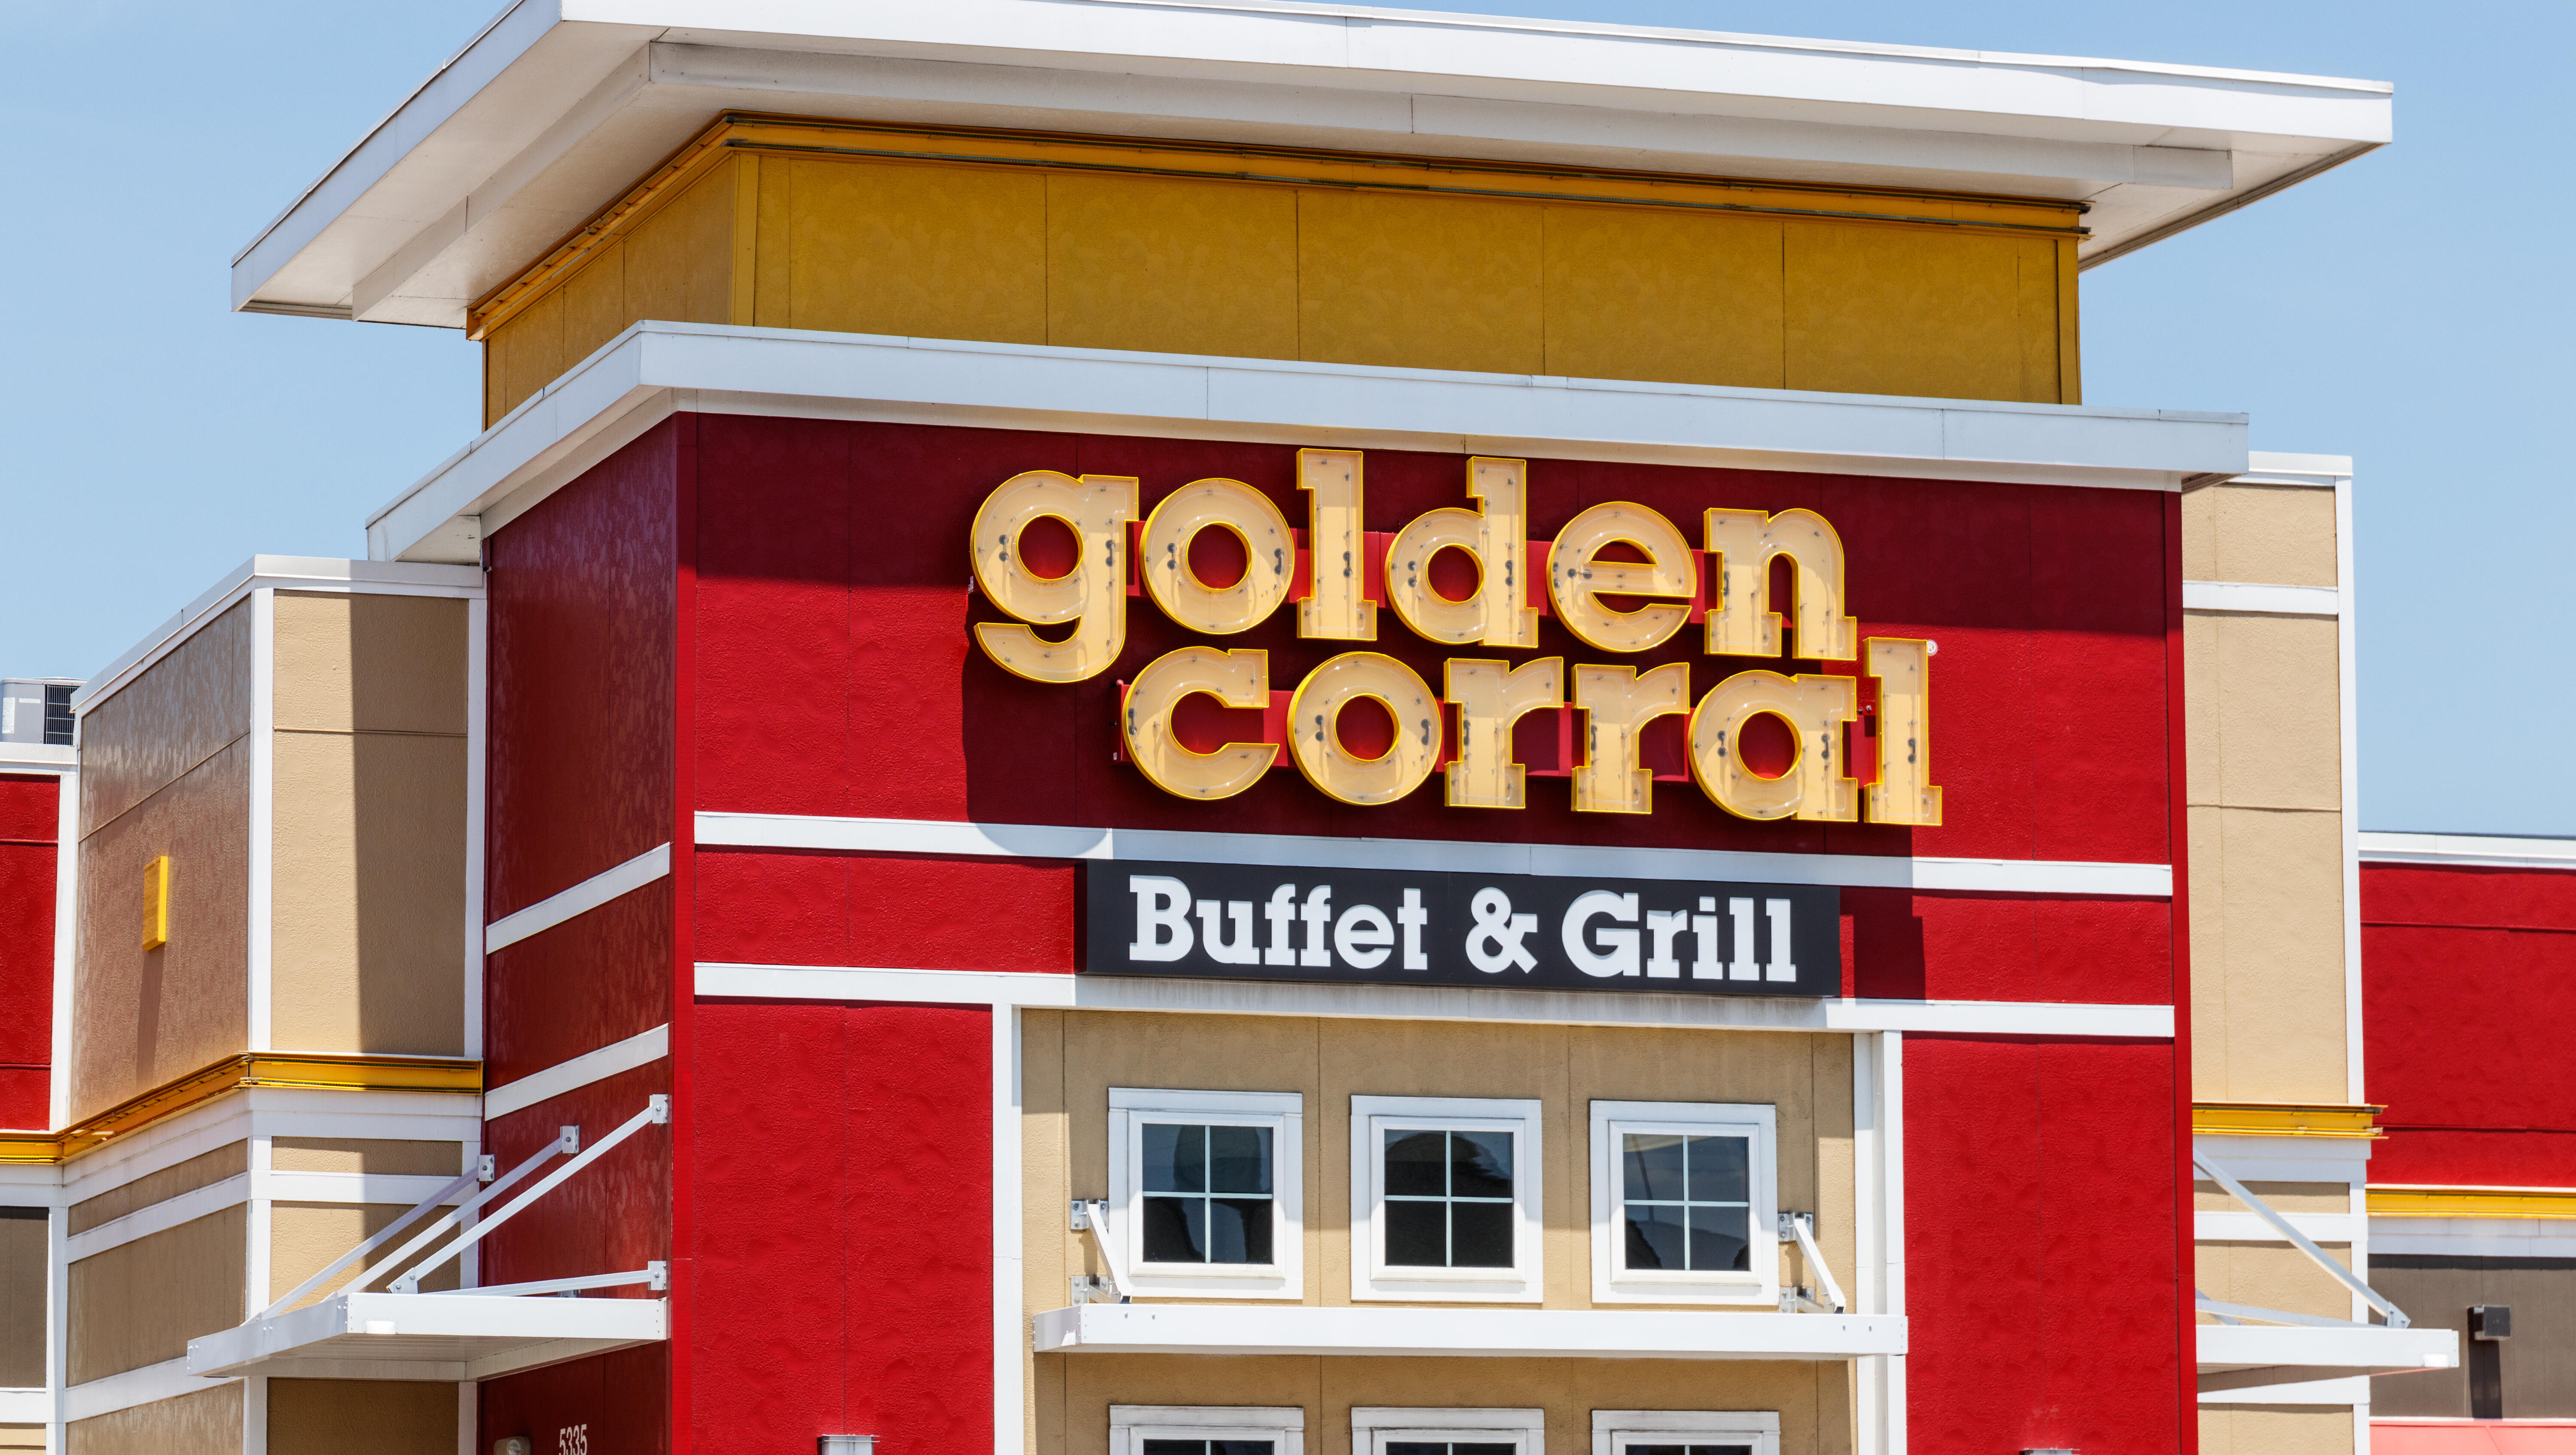 Woman Who Didn't Know She Was Pregnant Gives Birth at Golden Corral 